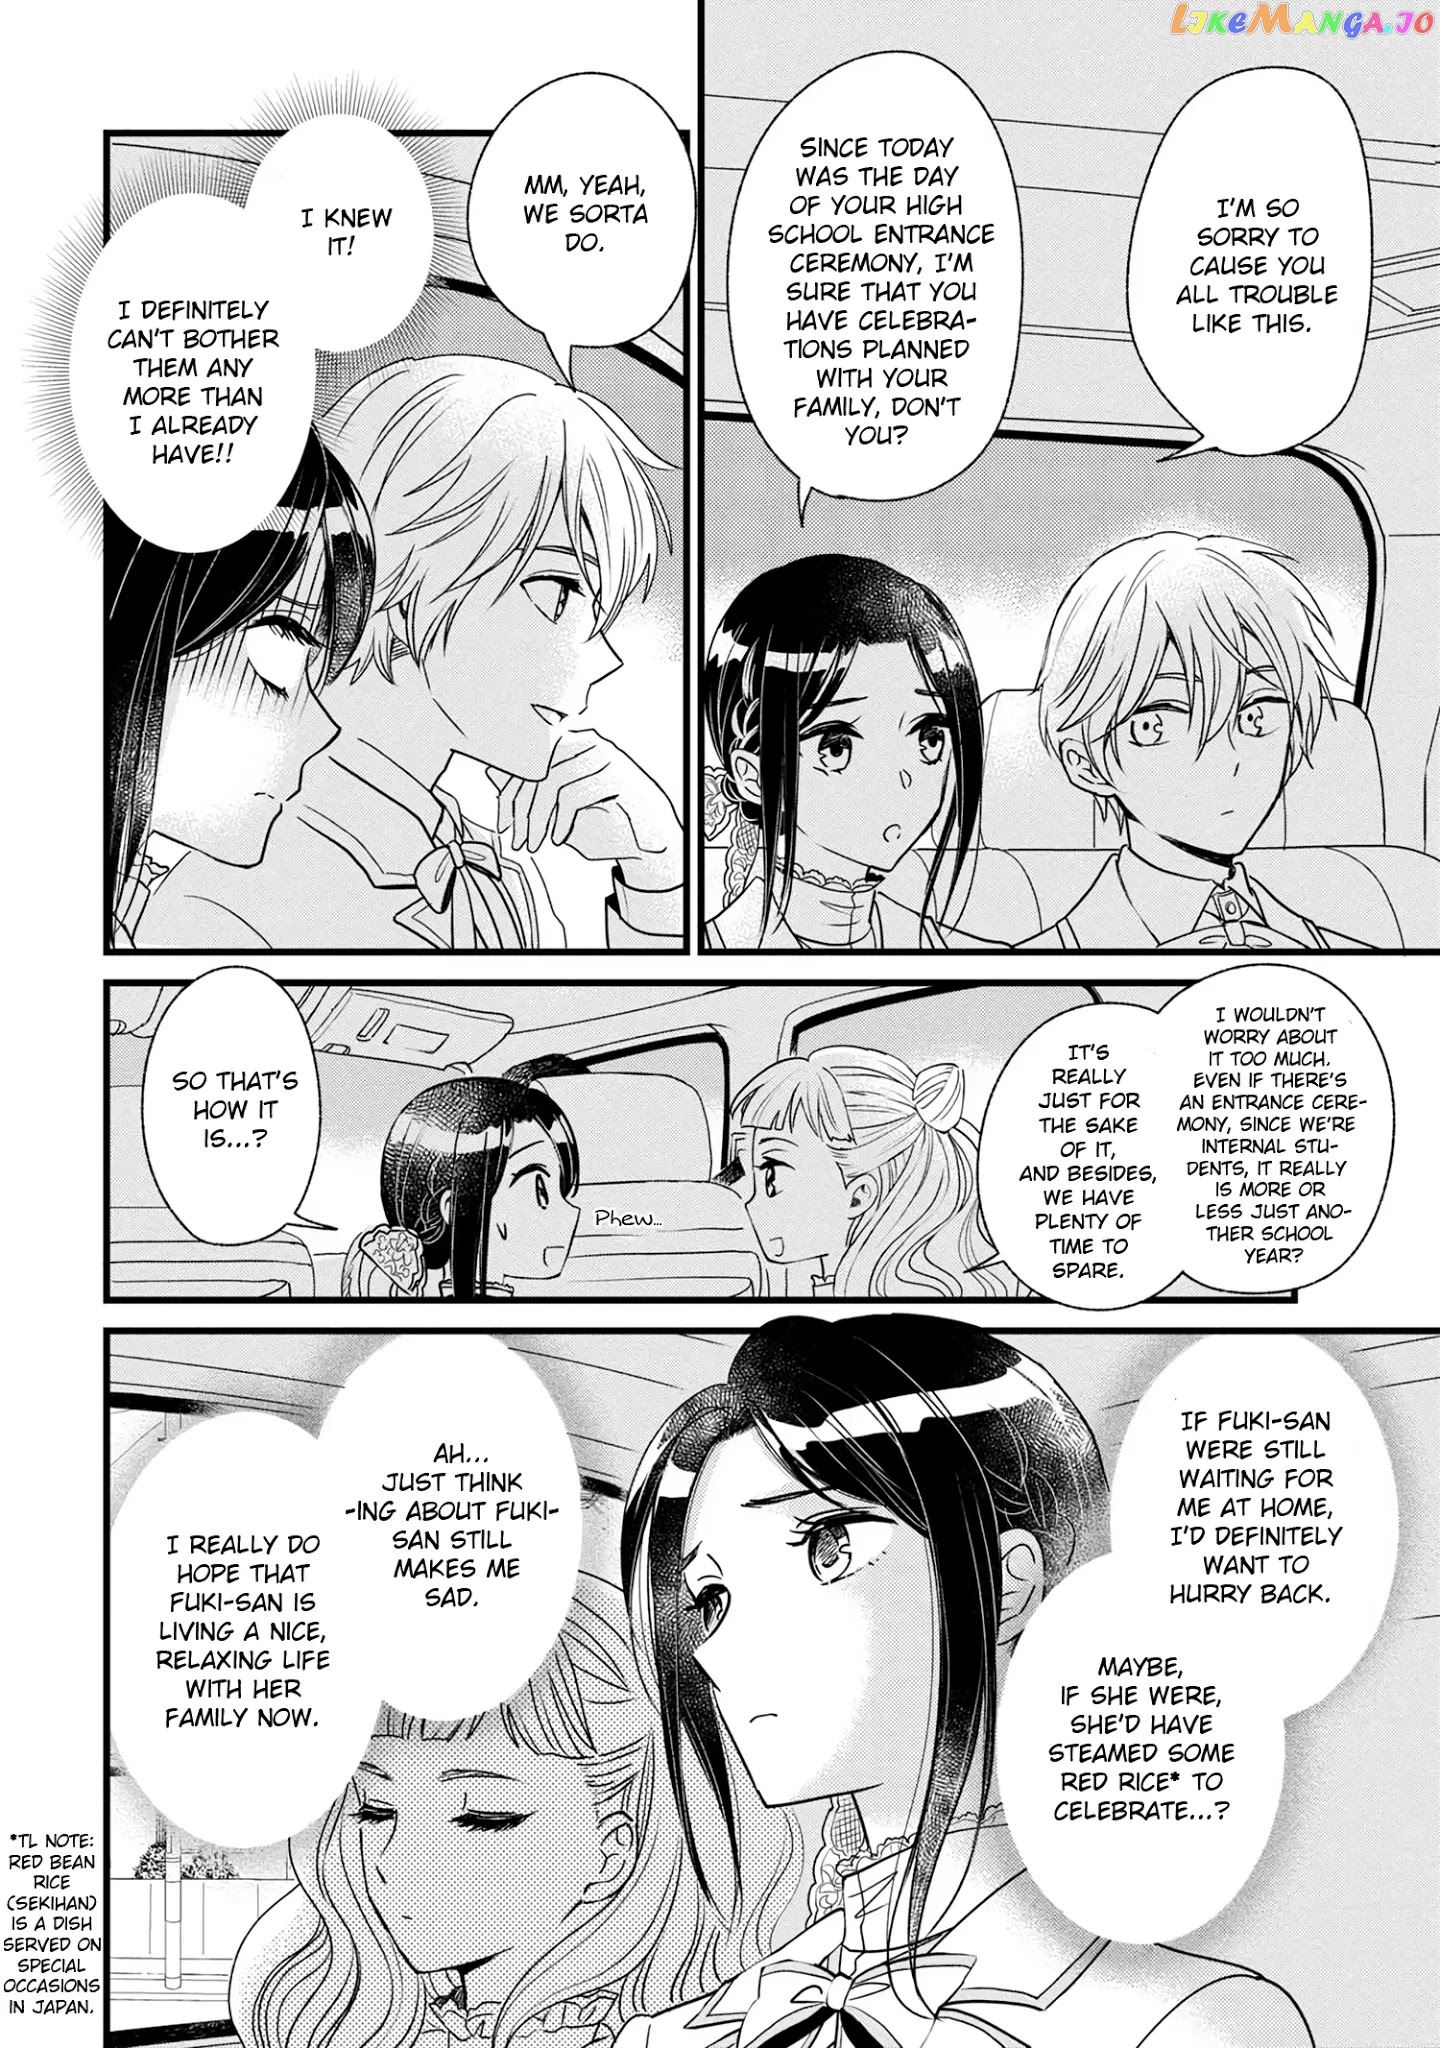 Reiko's Style: Despite Being Mistaken For A Rich Villainess, She's Actually Just Penniless chapter 3.3 - page 11